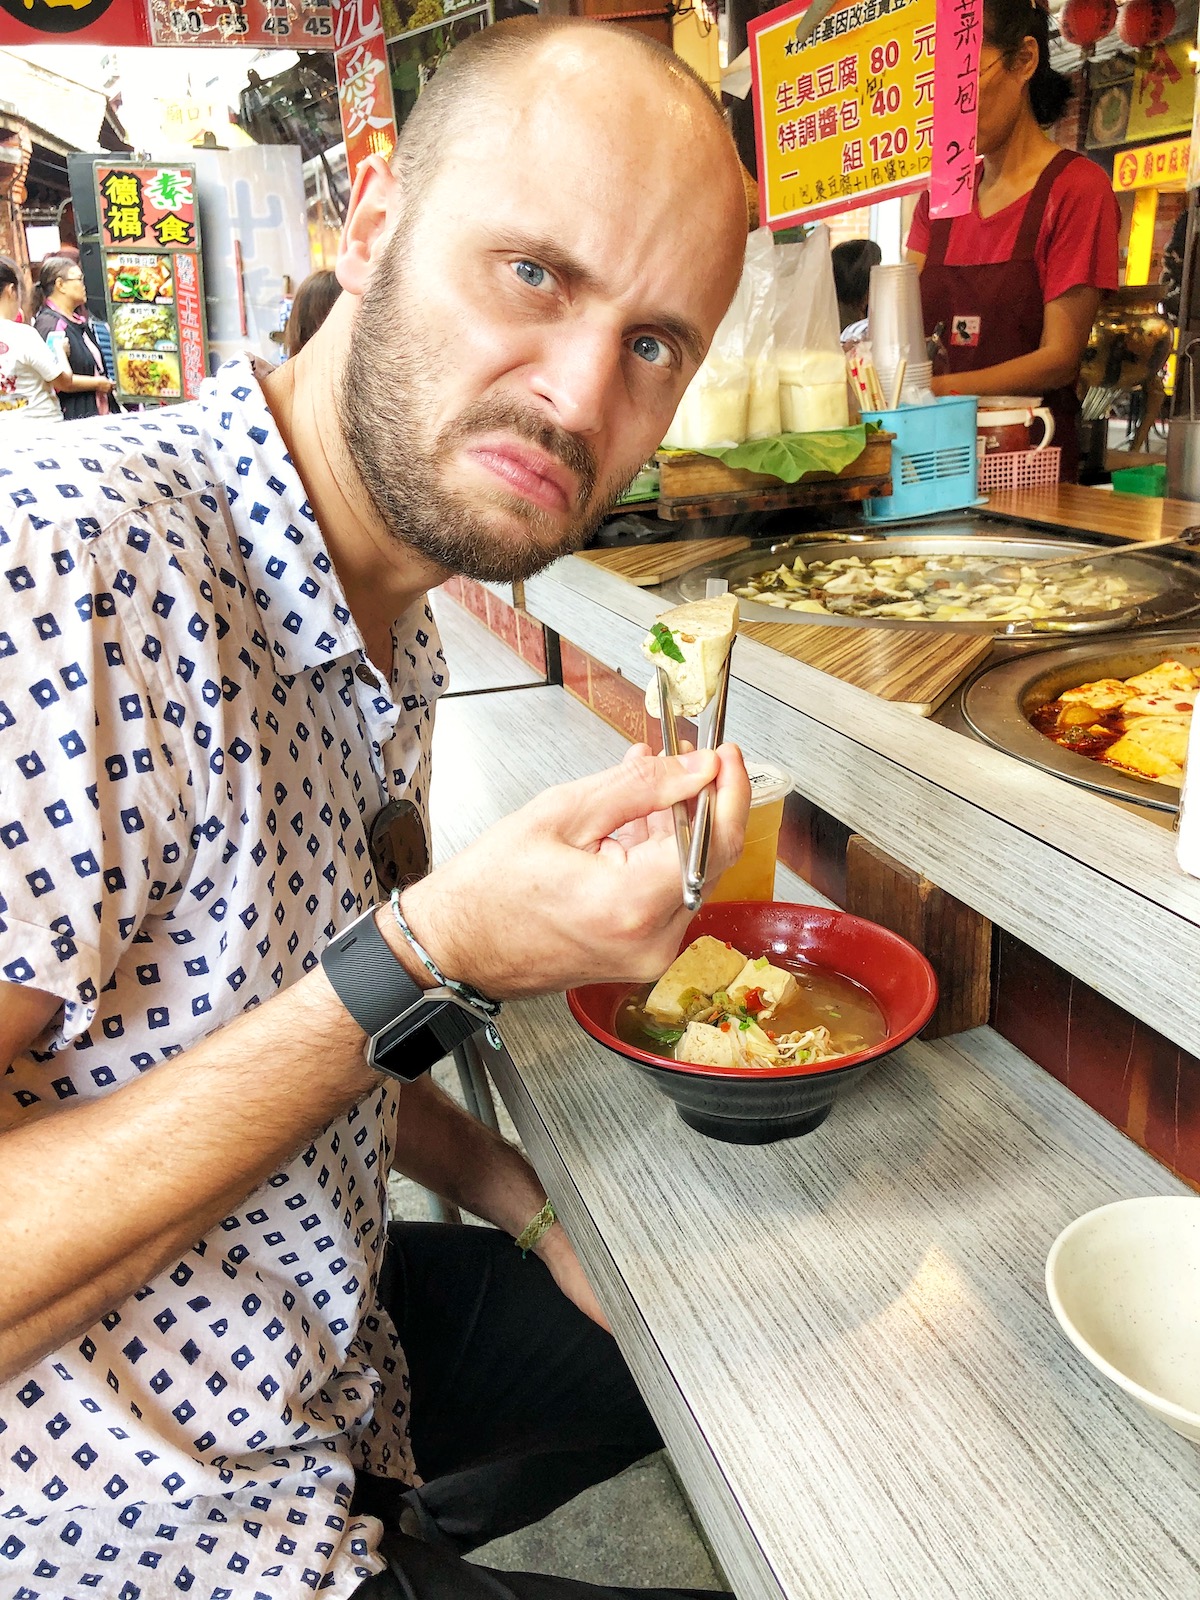 A man scowls as he tries to eat the famous "Stinky Tofu" in Taipei